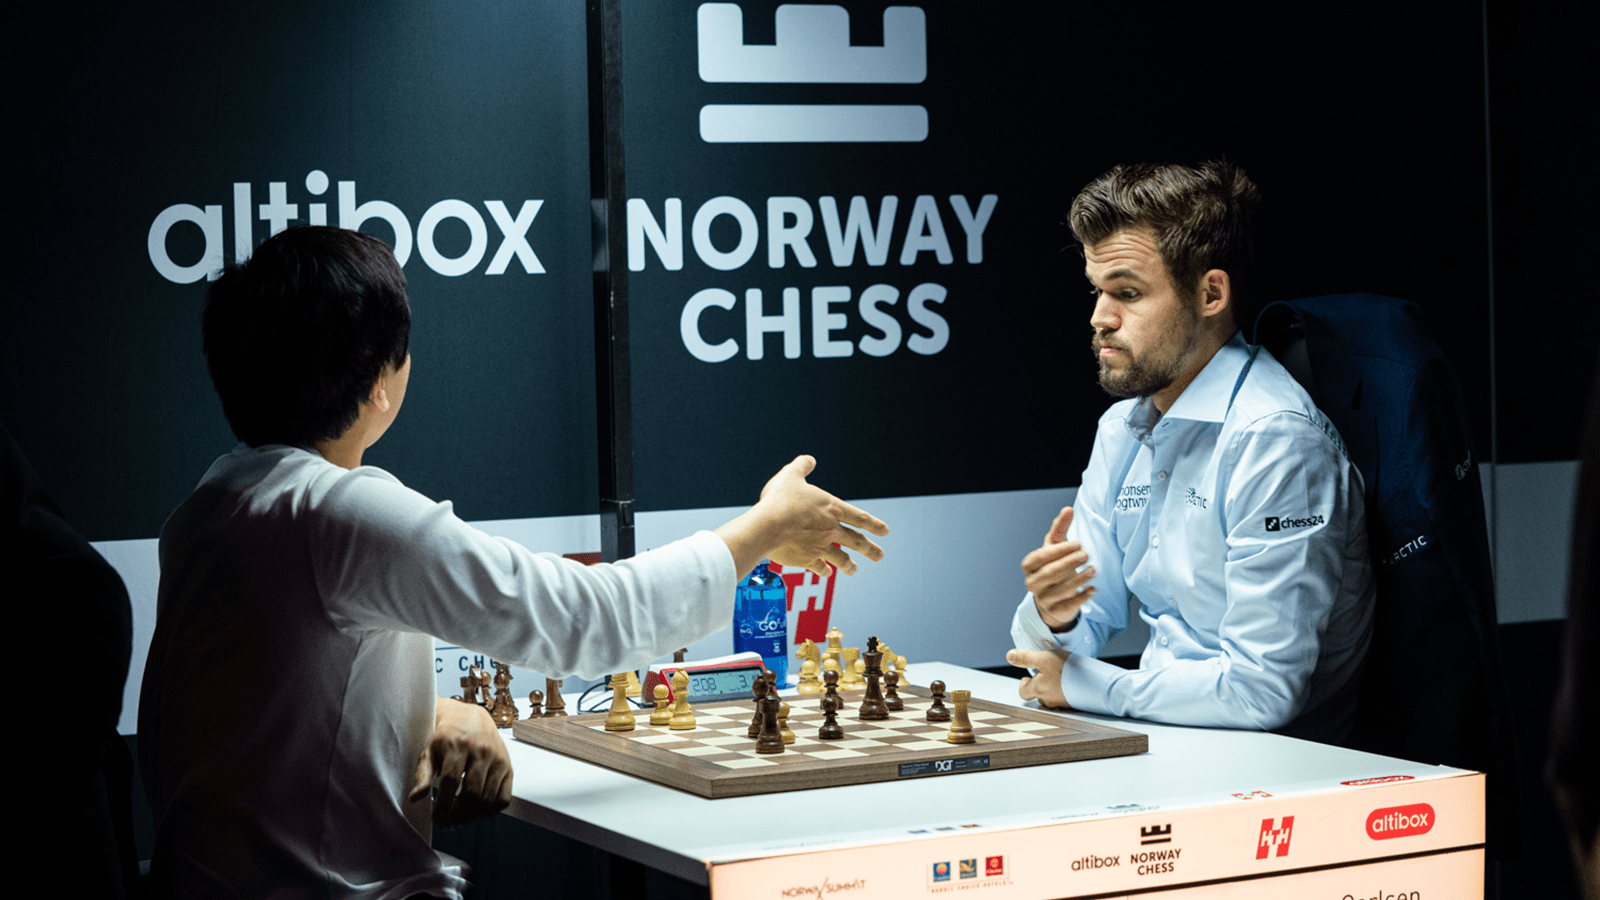 Norway Chess 9: Aronian cruises to victory